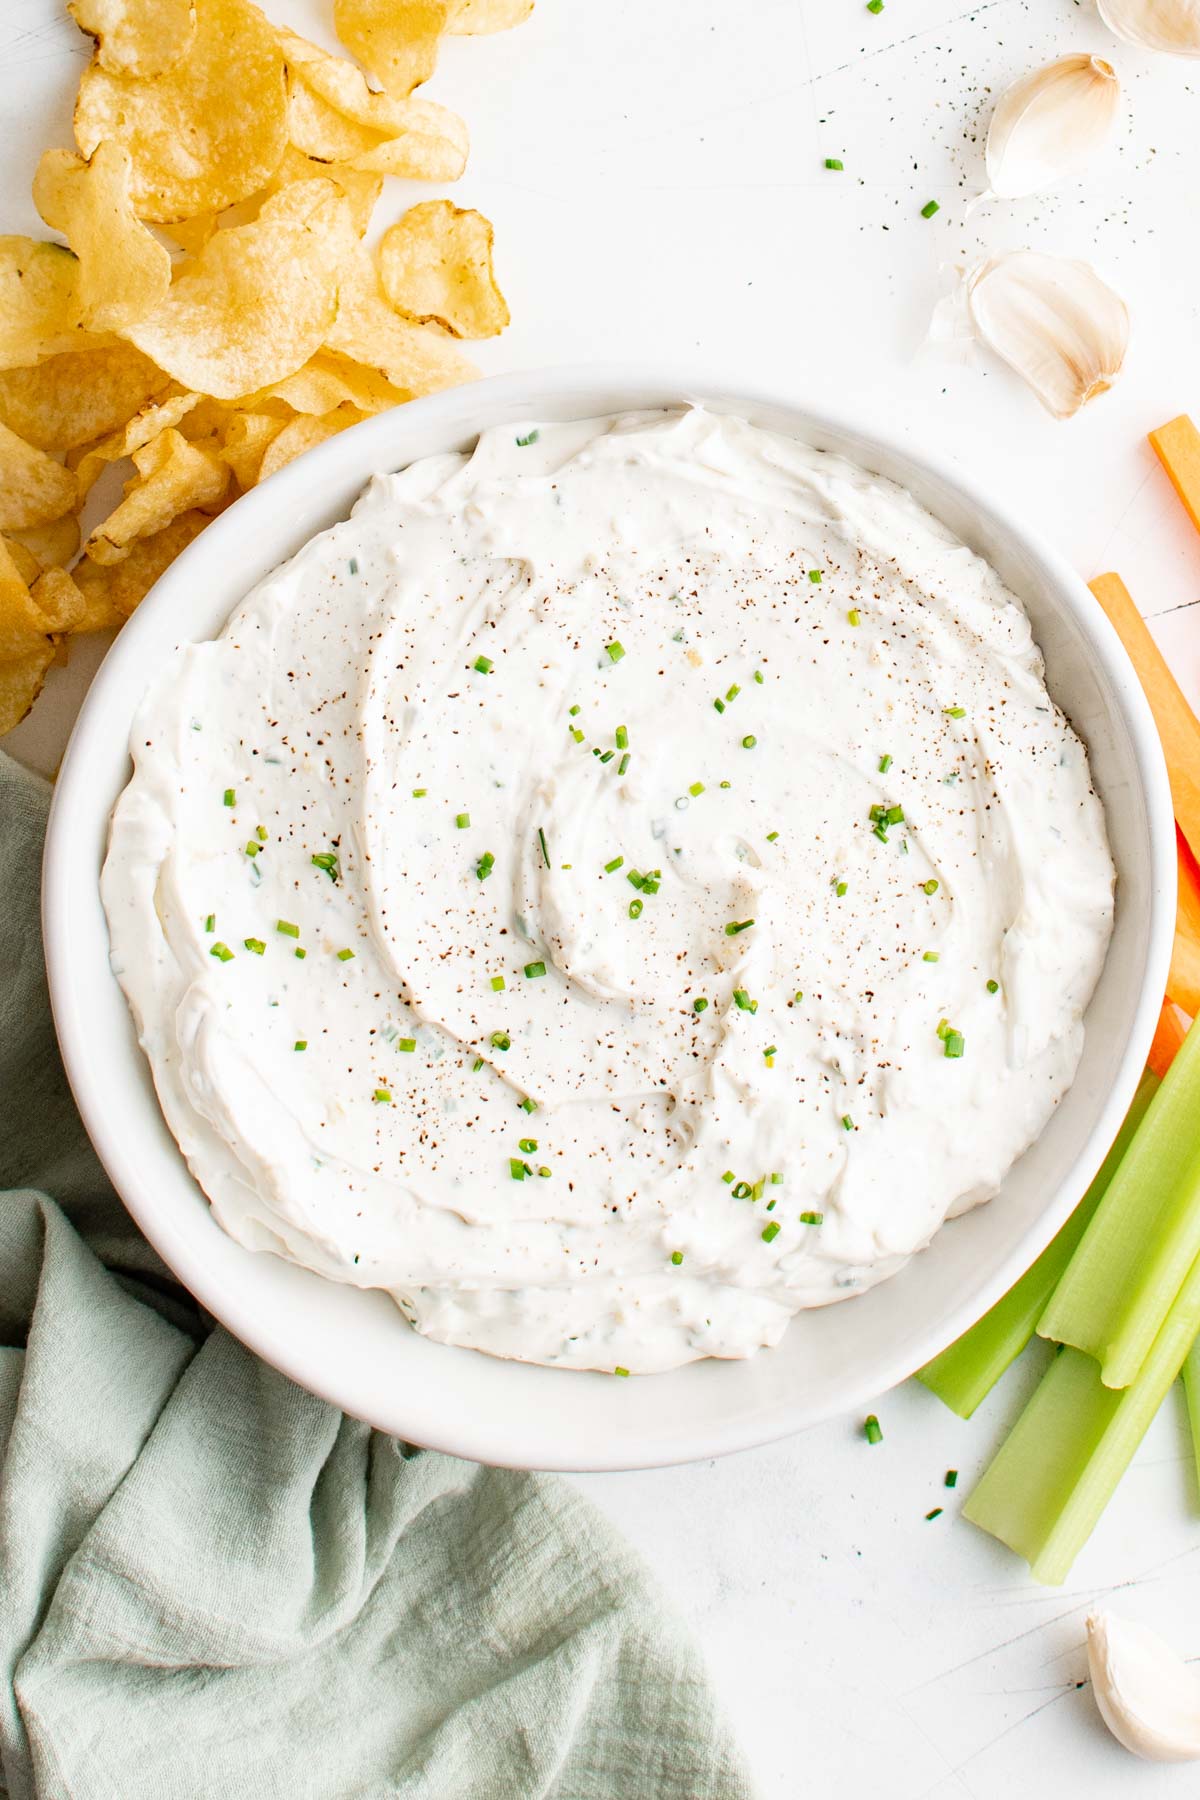 large bowl of garlic dip surrounded by potato chips and celery.